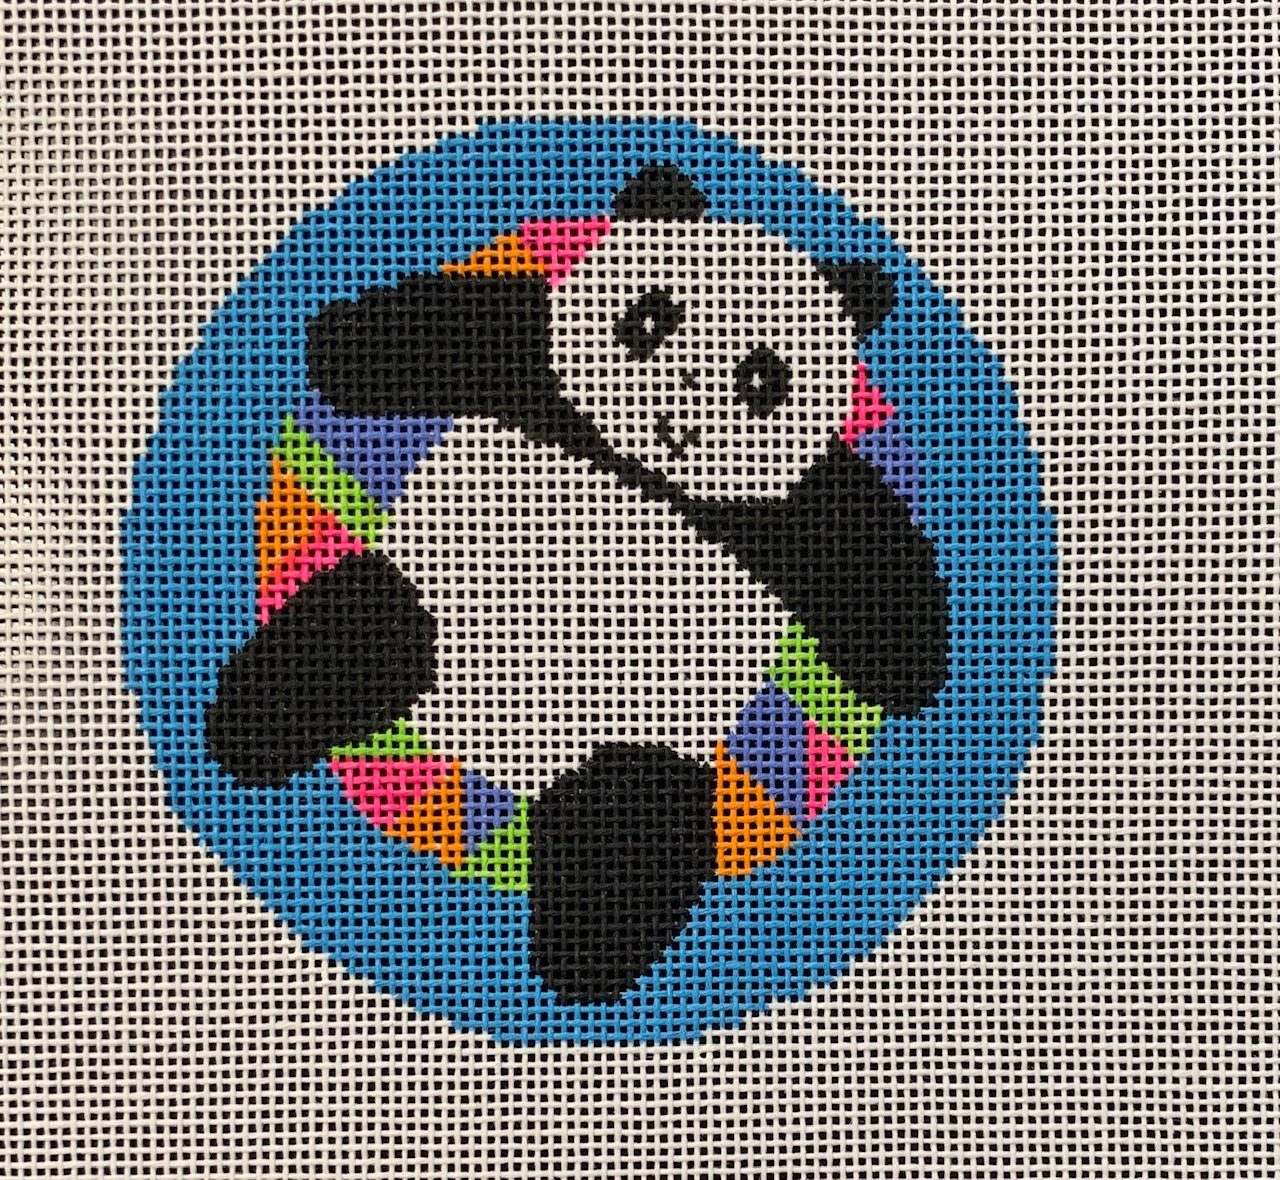 Vallerie Needlepoint Gallery round whimsical needlepoint canvas of a panda on a bright and vibrant floatie inner tube 